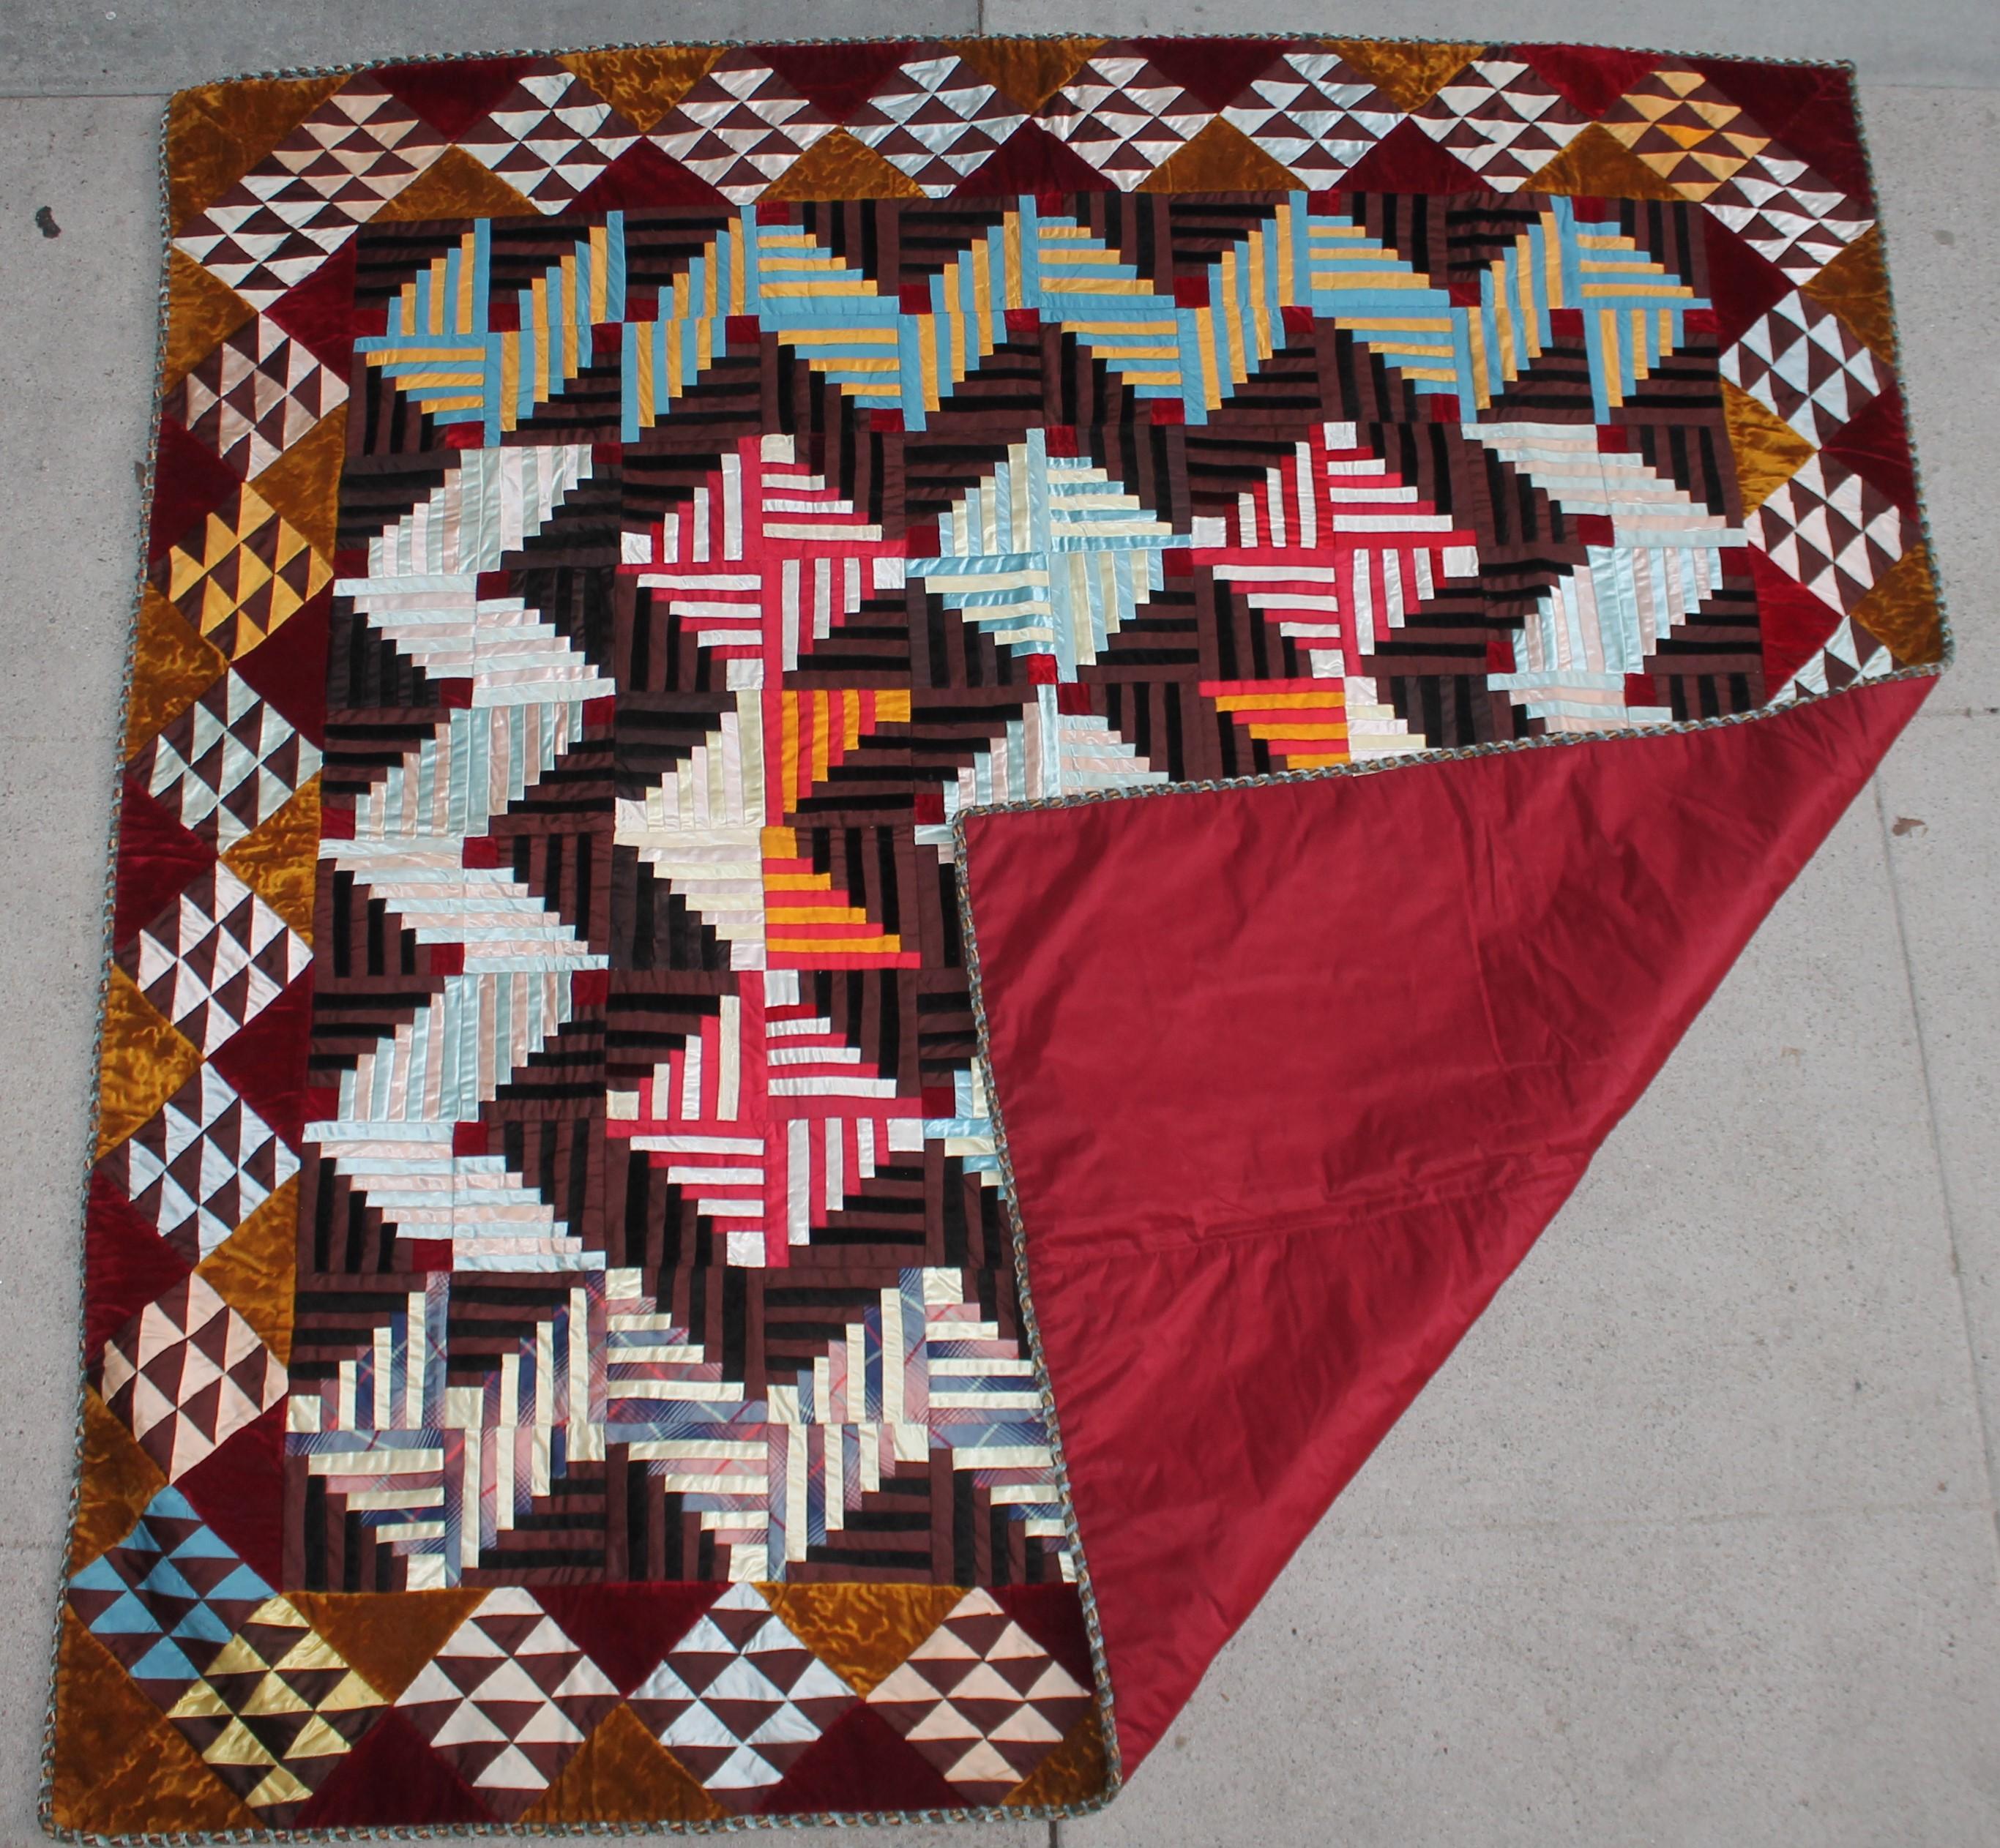 This amazing log cabin / barn raising silk & velvet quilt is in amazing mint condition. This comes to us from a private family estate collection in Beverly Hills, California. The backing is a burgundy silk fabric.